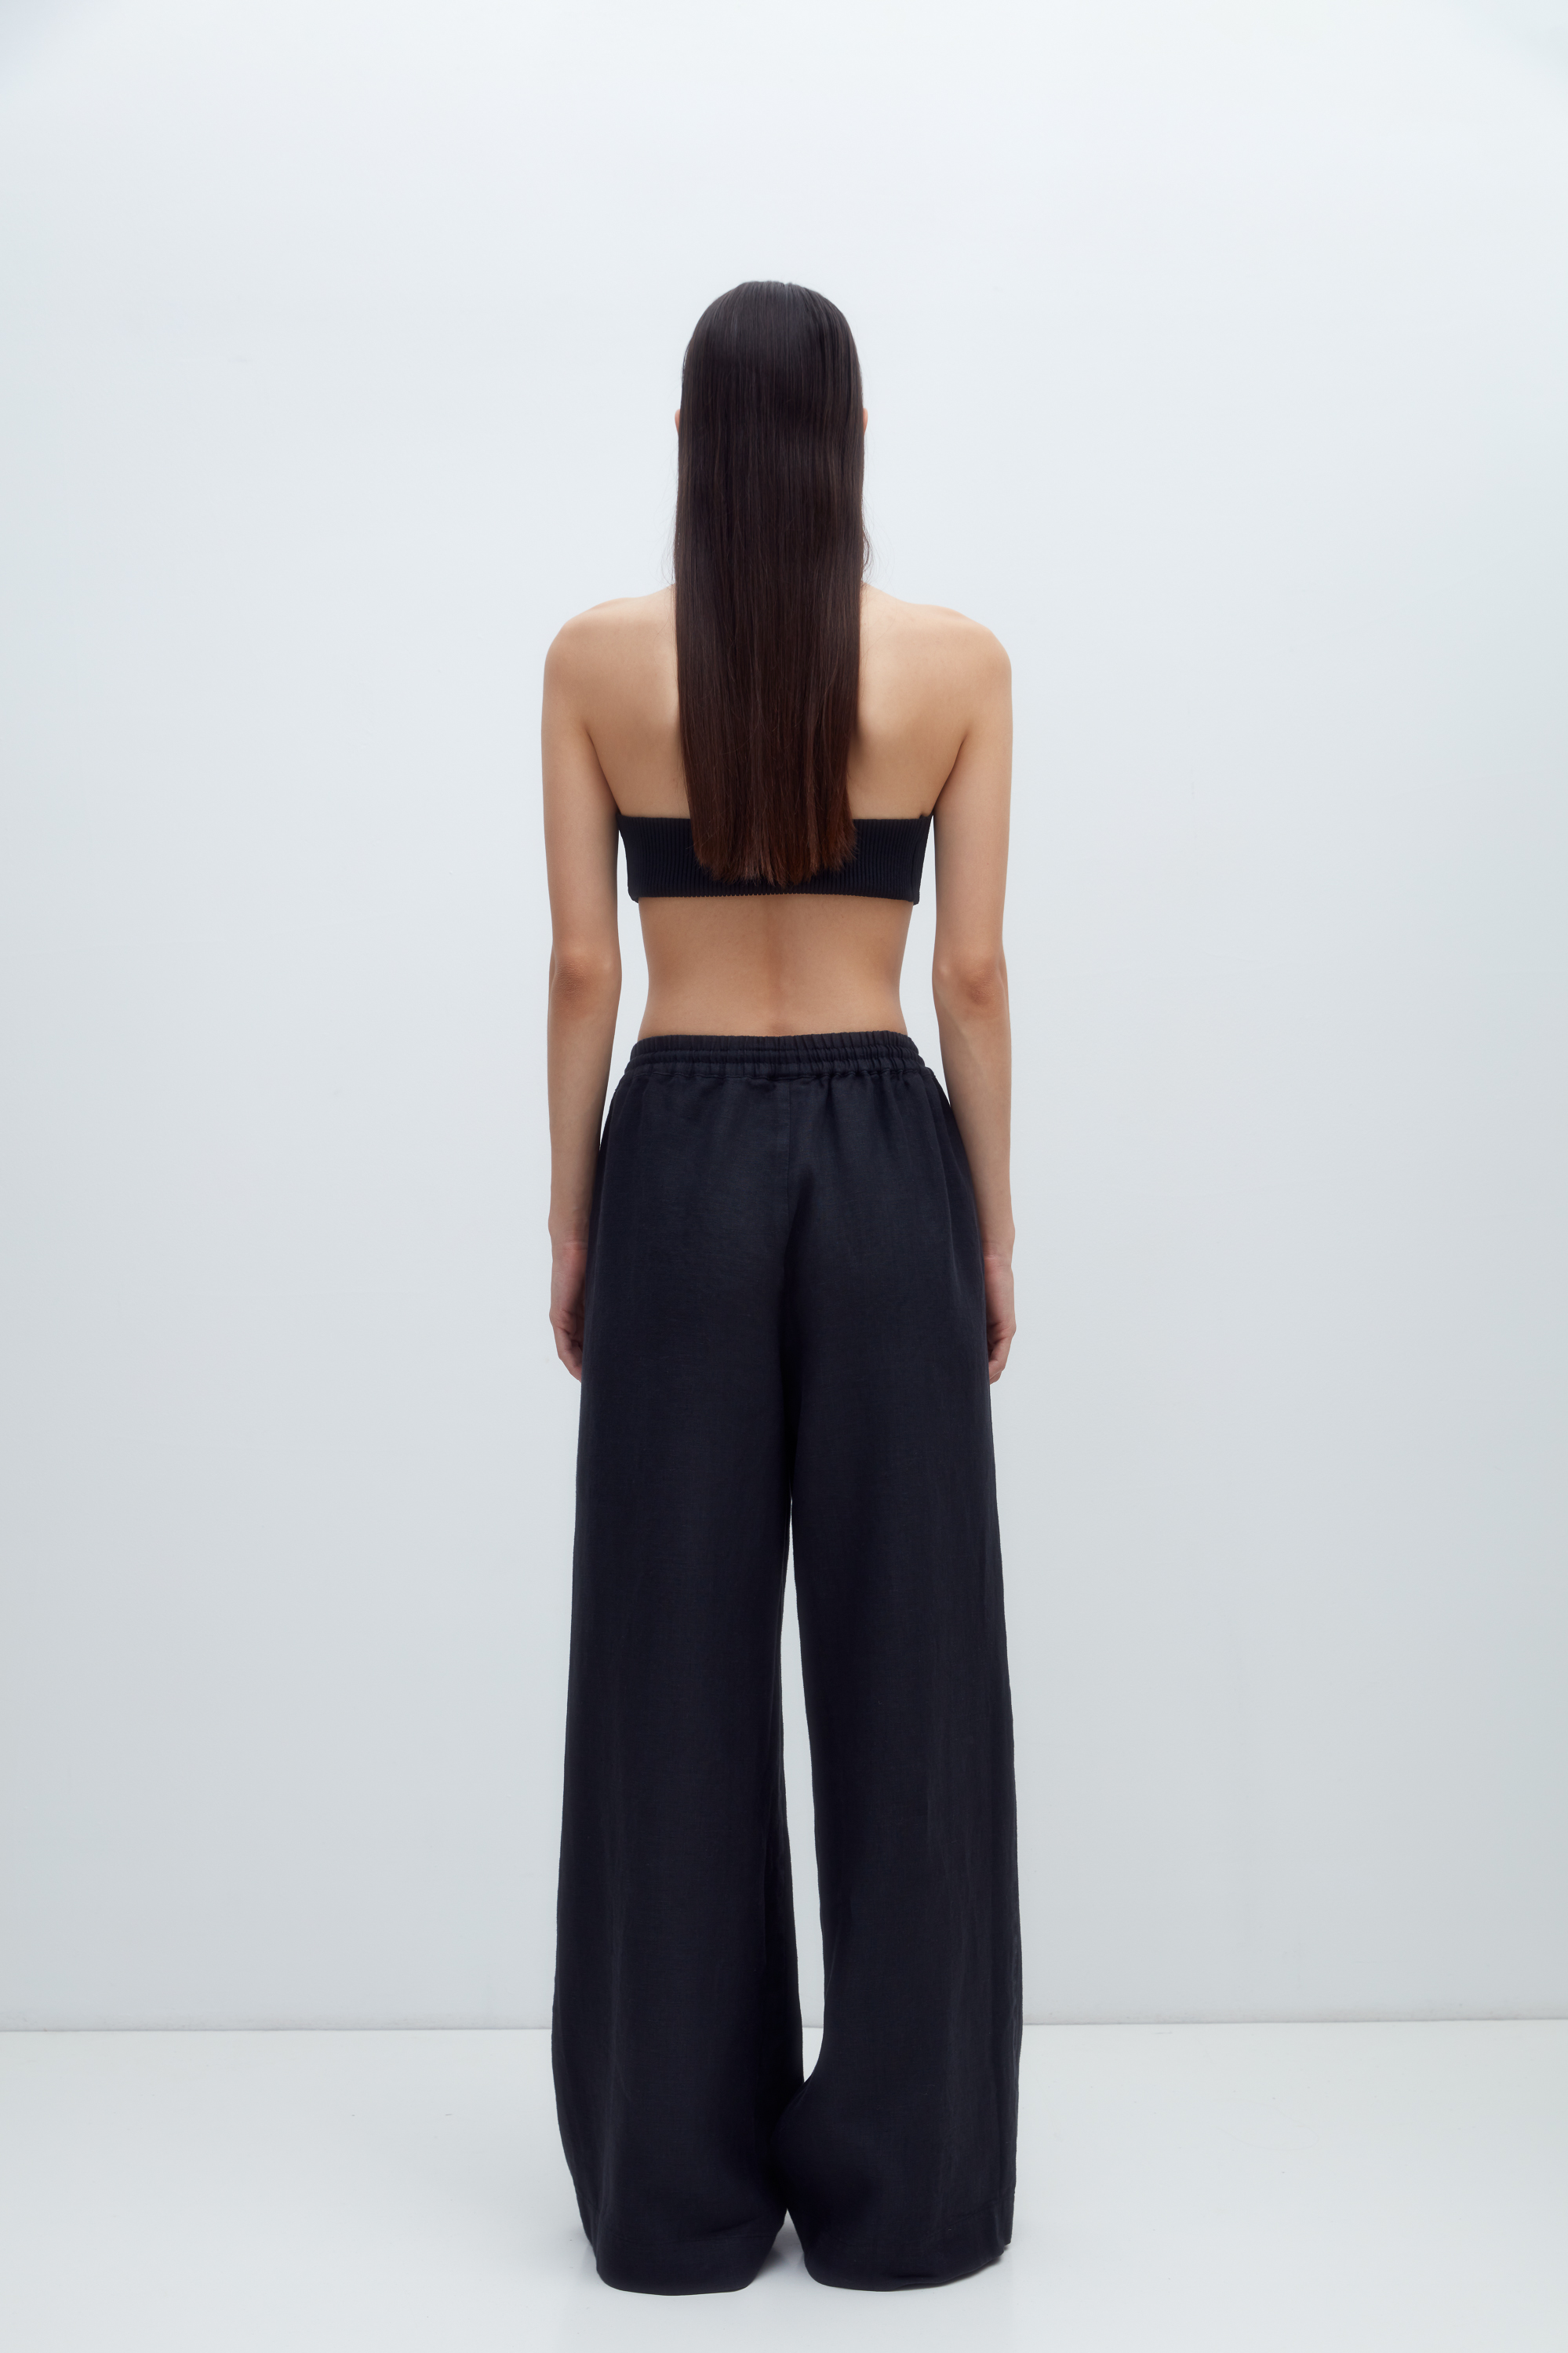 Trousers 4676-01 Black from BRUSNiKA